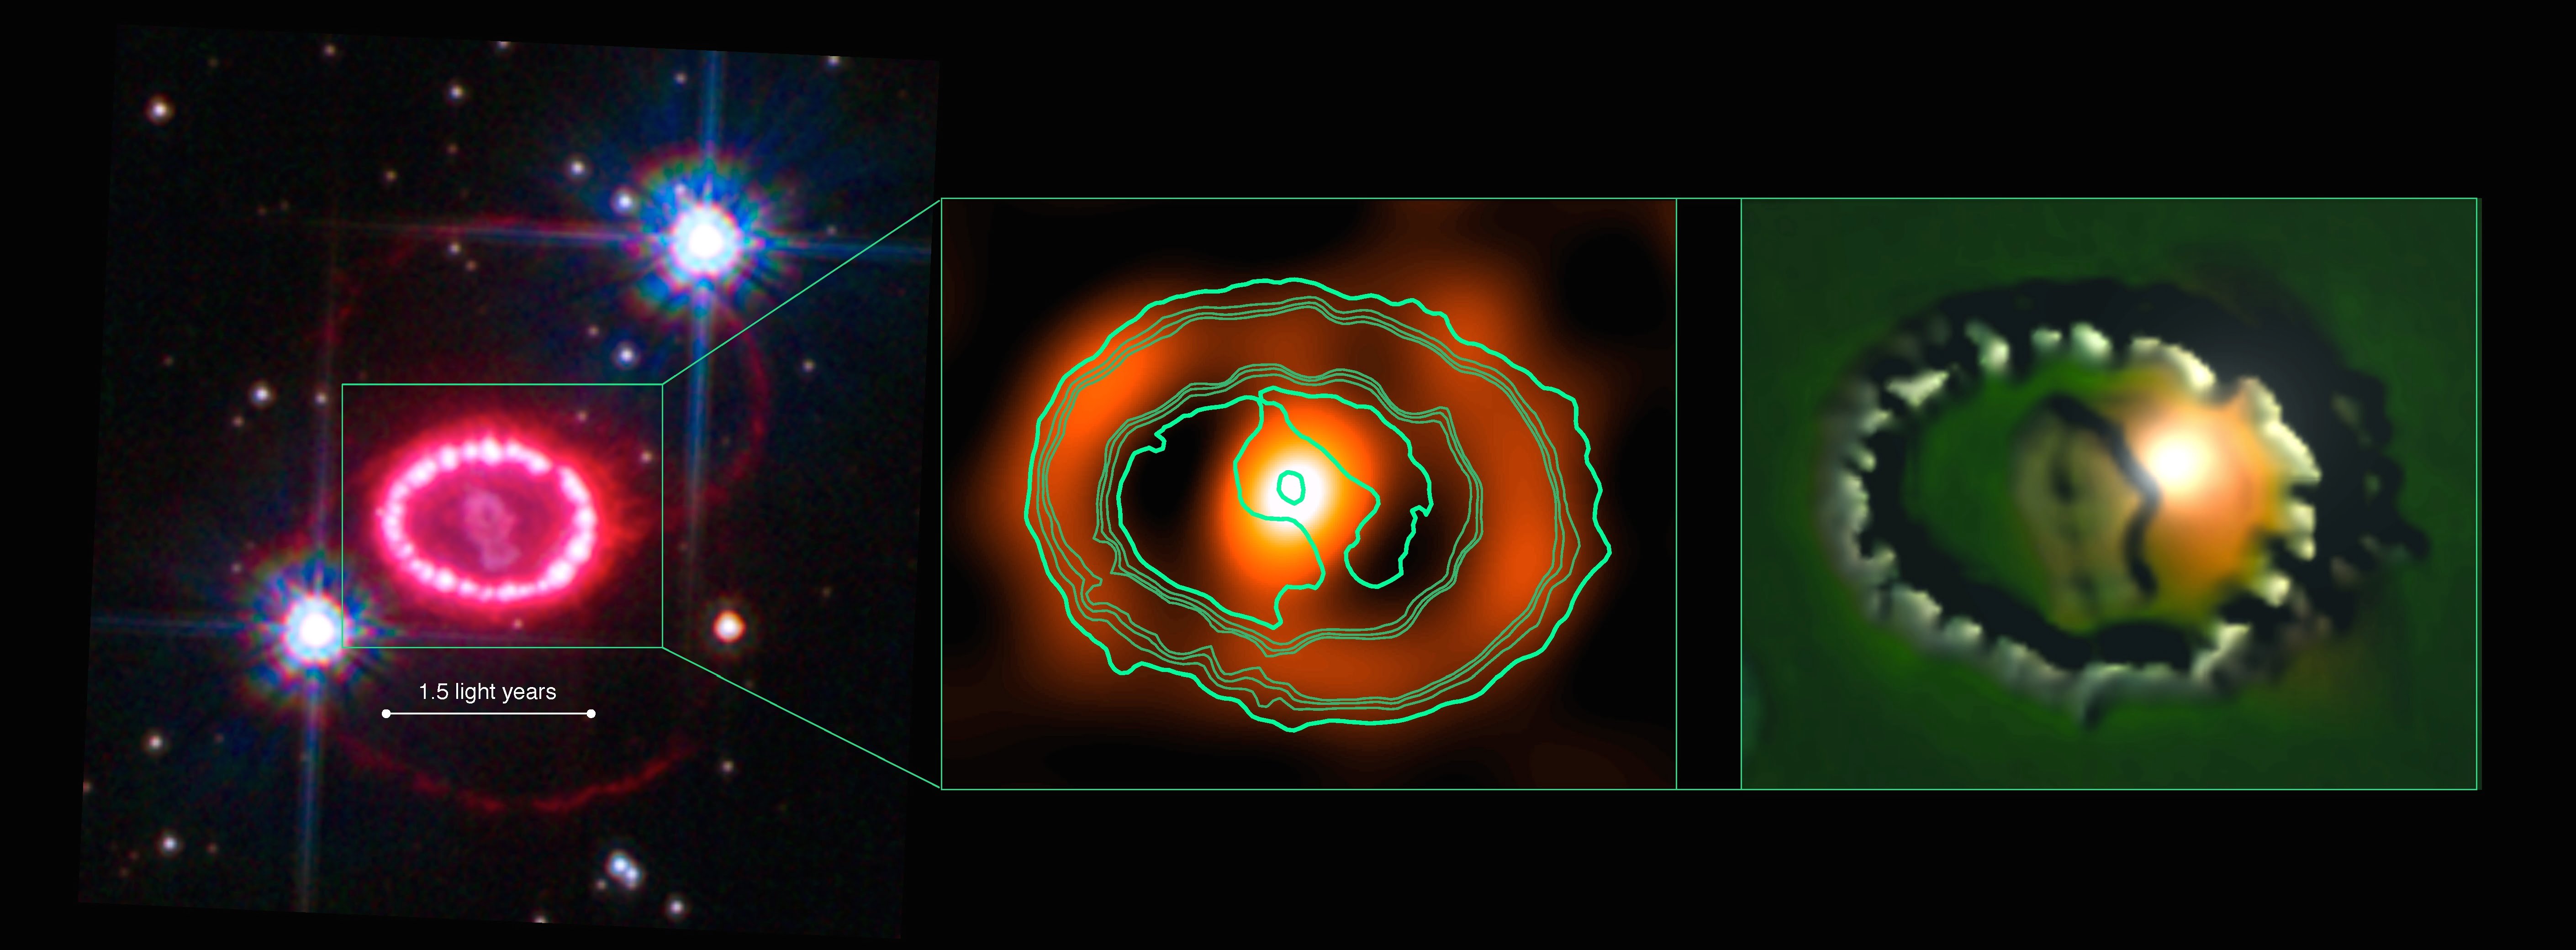  A panel of images showing different views of Supernova Remnant 1987A. Left Panel: SNR1987A as seen by the Hubble Space Telescope in 2010.Middle Panel: SNR1987A as seen by the Australia Telescope Compact Array (ATCA) in New South Wales and the Atacama Large Millimeter/submillimeter Array (ALMA) in Chile. Right Panel: A computer generated visualisation of the remnant showing the possible location of a Pulsar. Credit: ATCA & ALMA Observations & data - G. Zanardo et al. / HST Image: NASA, ESA, K. France (University of Colorado, Boulder), P. Challis and R. Kirshner (Harvard-Smithsonian Center for Astrophysics)